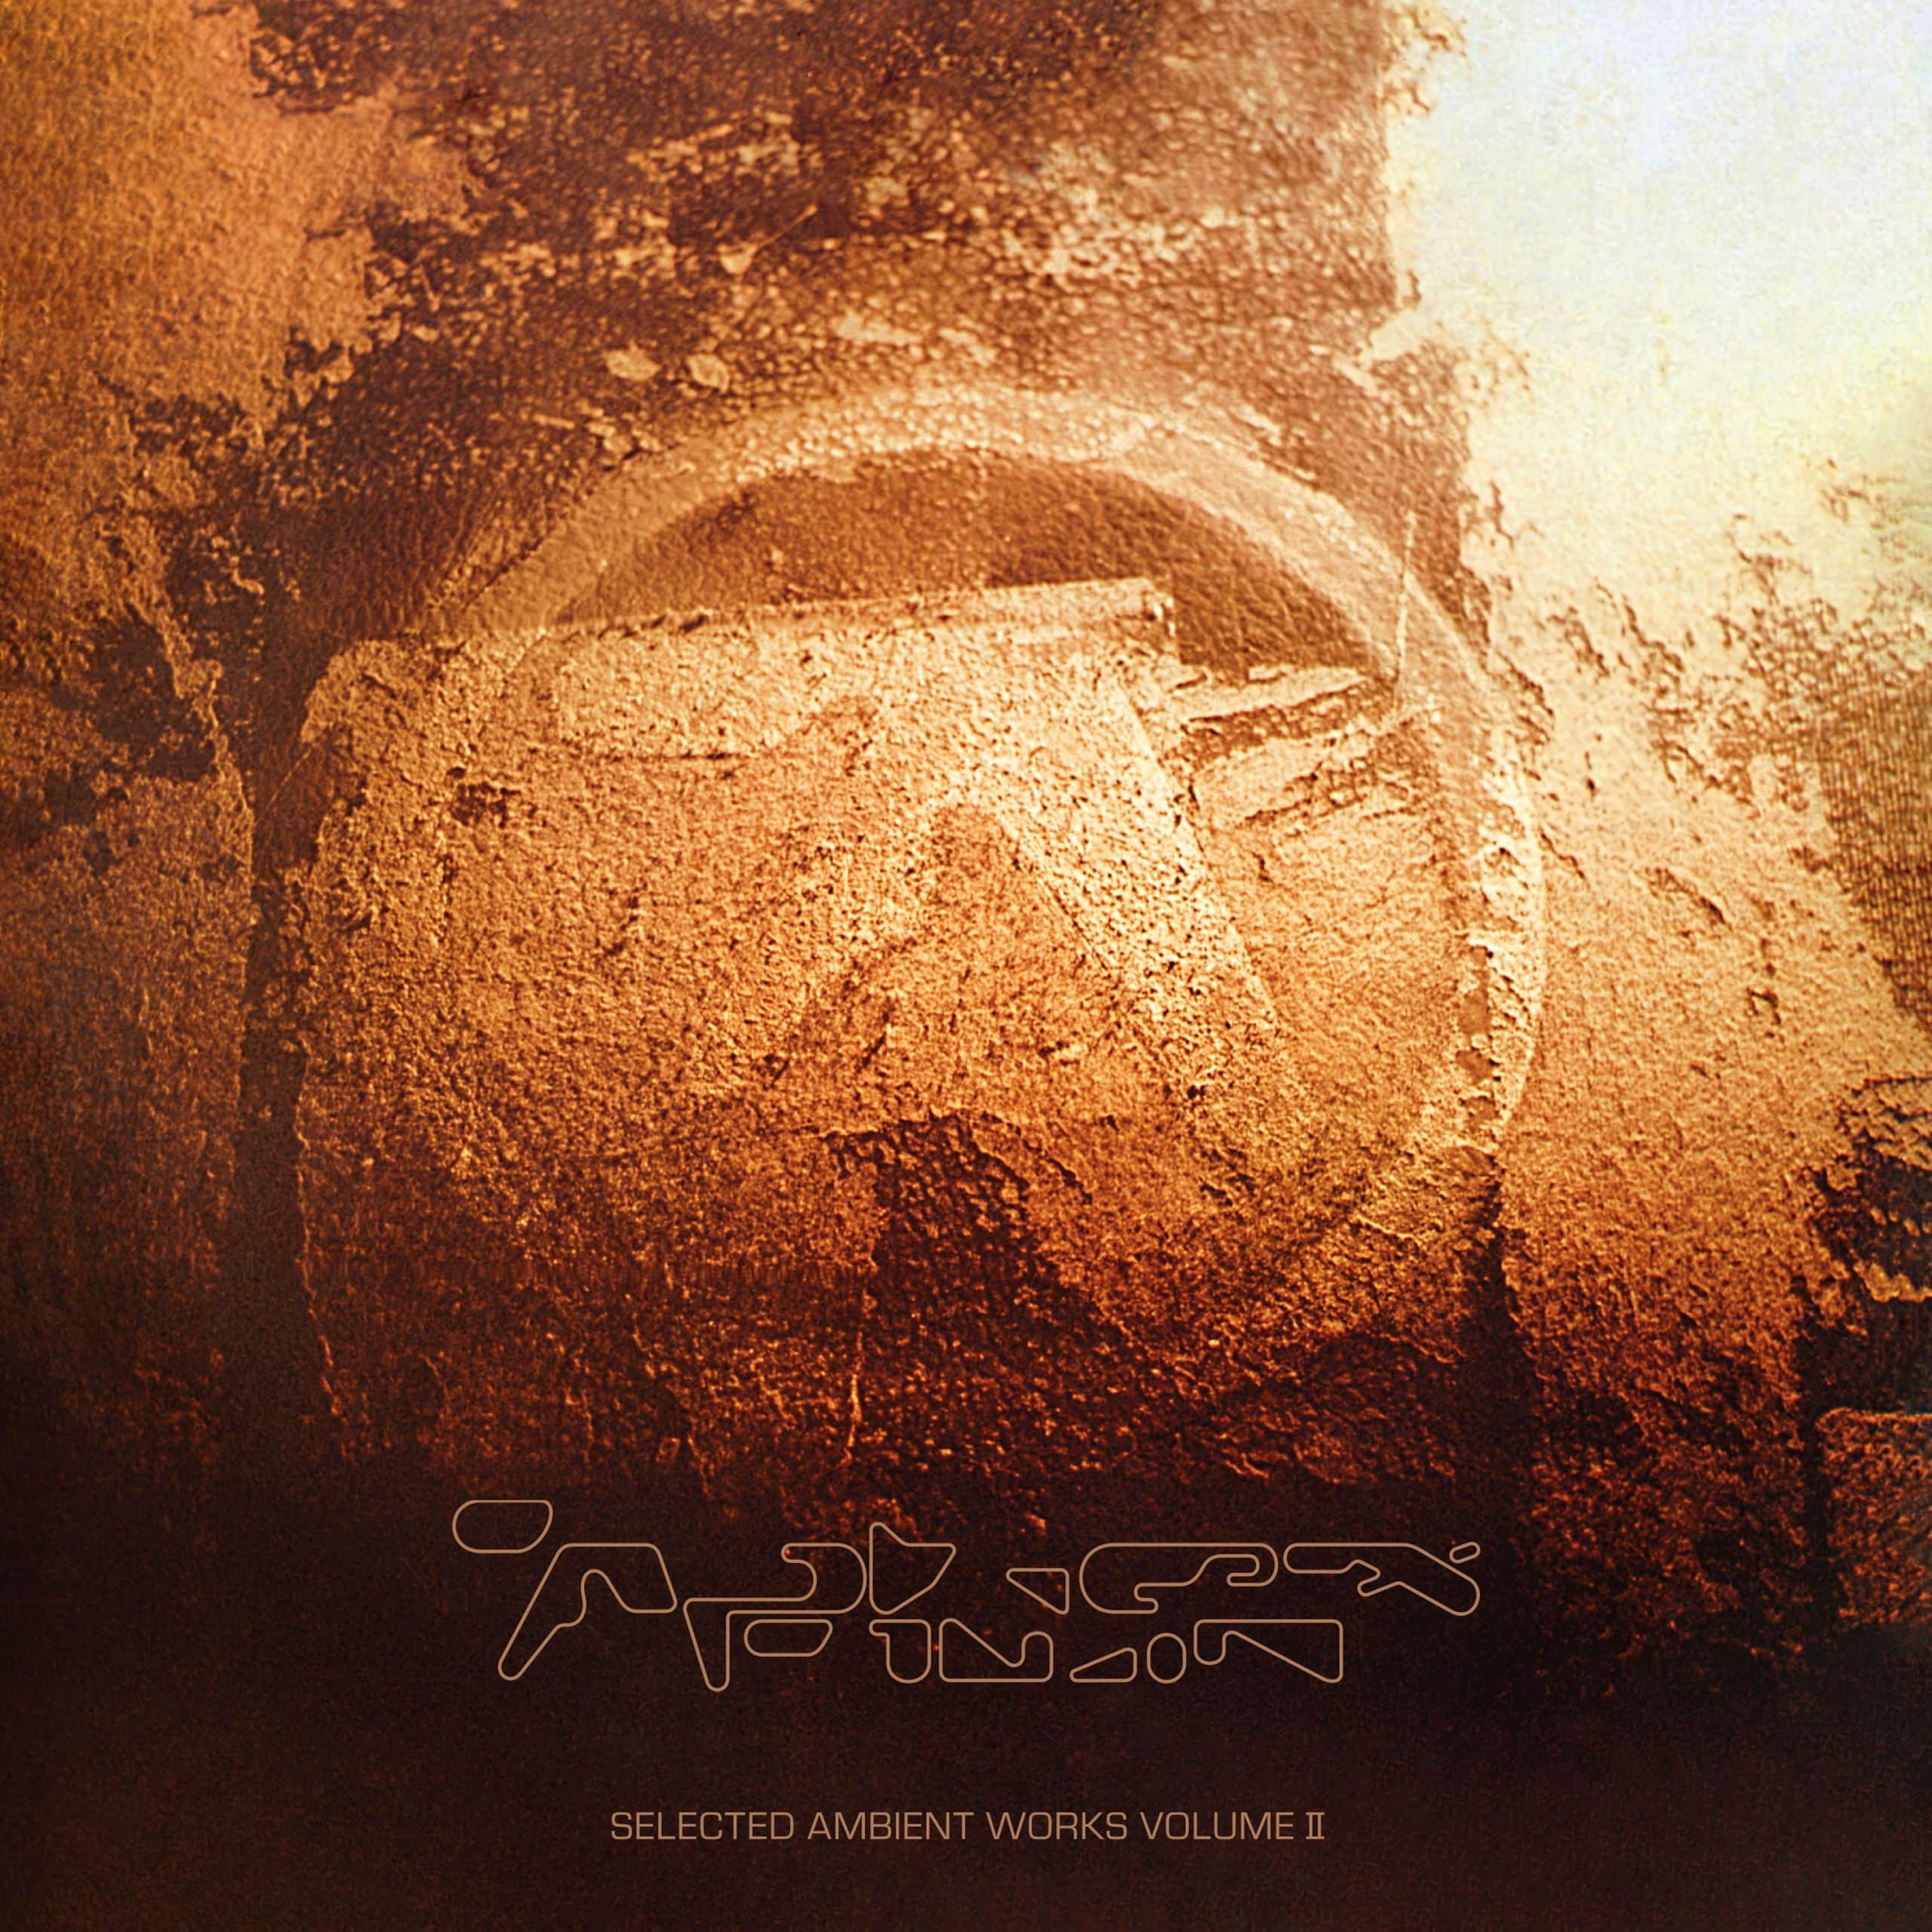 Aphex Twin – Selected Ambient Works